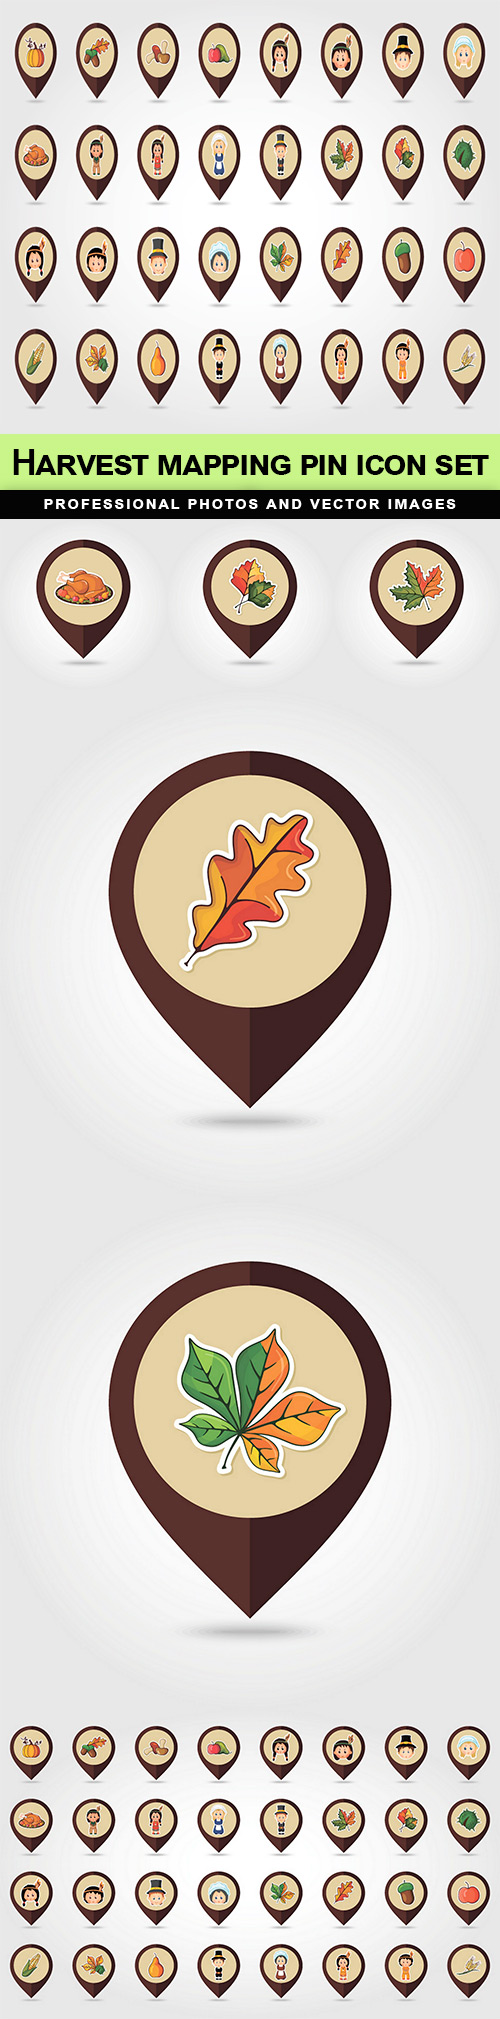 Harvest mapping pin icon set - 6 EPS